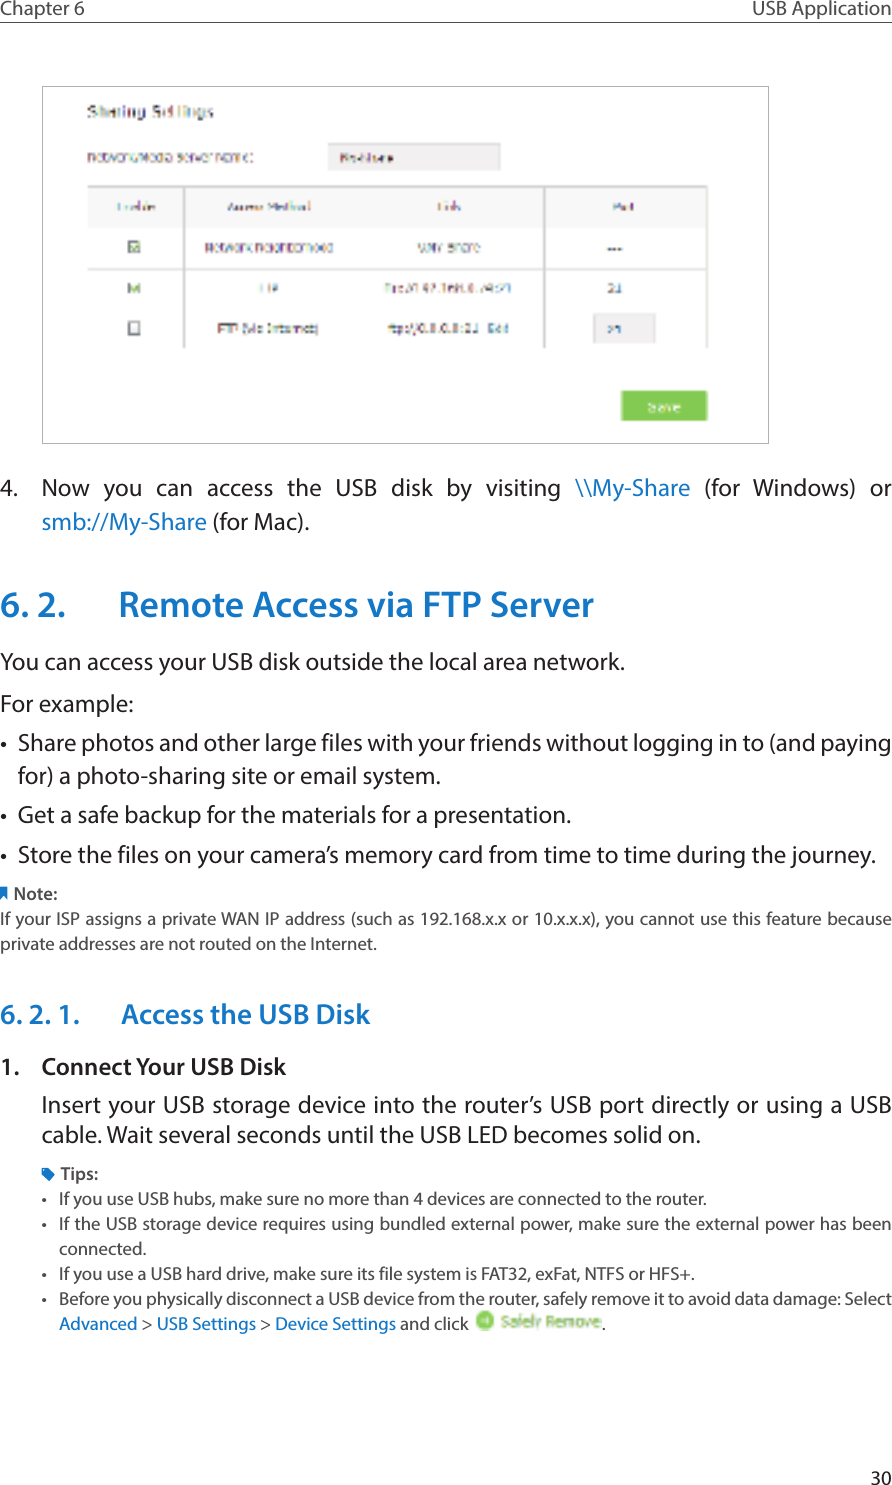 30Chapter 6 USB Application4.  Now you can access the USB disk by visiting \\My-Share (for Windows) or  smb://My-Share (for Mac).6. 2.  Remote Access via FTP ServerYou can access your USB disk outside the local area network.For example:•  Share photos and other large files with your friends without logging in to (and paying for) a photo-sharing site or email system.•  Get a safe backup for the materials for a presentation.•  Store the files on your camera’s memory card from time to time during the journey.Note:If your ISP assigns a private WAN IP address (such as 192.168.x.x or 10.x.x.x), you cannot use this feature because private addresses are not routed on the Internet.6. 2. 1.  Access the USB Disk1.  Connect Your USB DiskInsert your USB storage device into the router’s USB port directly or using a USB cable. Wait several seconds until the USB LED becomes solid on.Tips:•  If you use USB hubs, make sure no more than 4 devices are connected to the router.•  If the USB storage device requires using bundled external power, make sure the external power has been connected.•  If you use a USB hard drive, make sure its file system is FAT32, exFat, NTFS or HFS+.•  Before you physically disconnect a USB device from the router, safely remove it to avoid data damage: Select Advanced &gt; USB Settings &gt; Device Settings and click  .